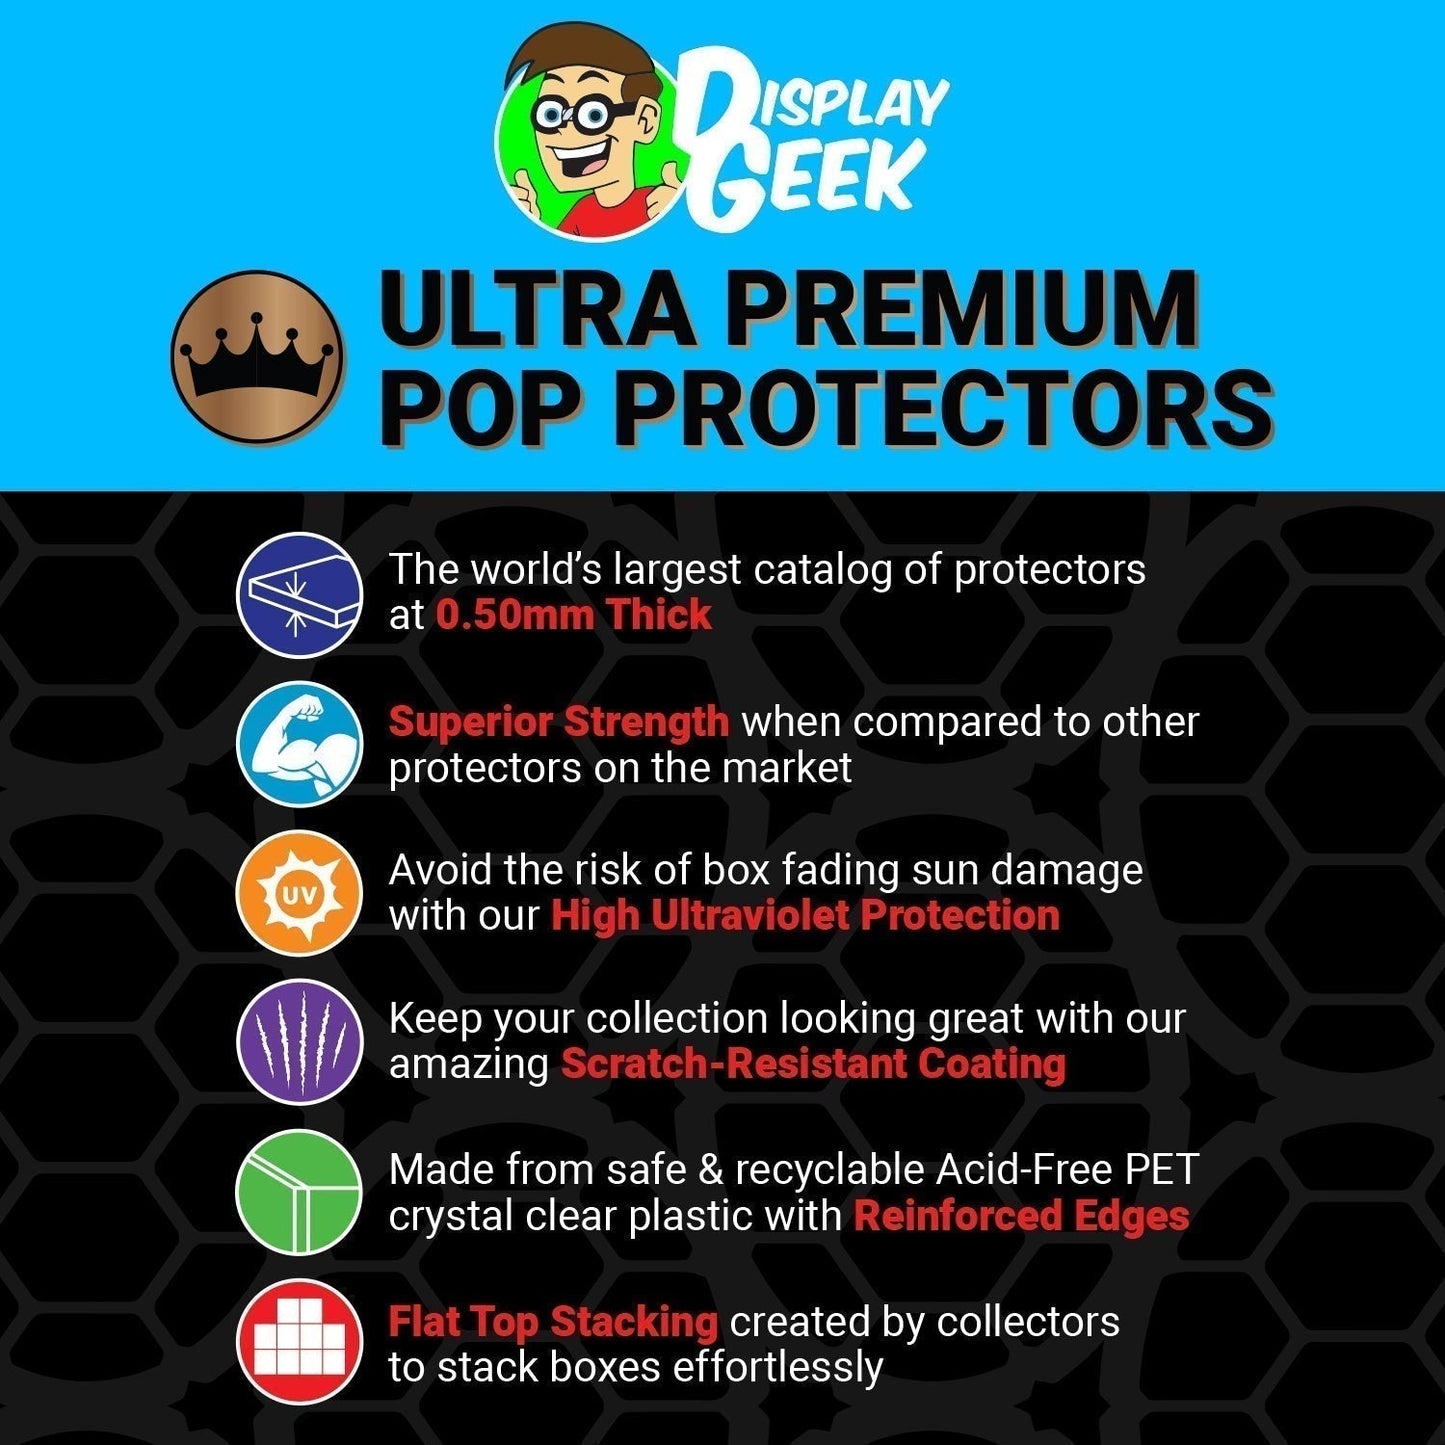 Pop Protector for 6 inch Zetsu #1438 Super Size Funko Pop - PPG Pop Protector Guide Search Created by Display Geek